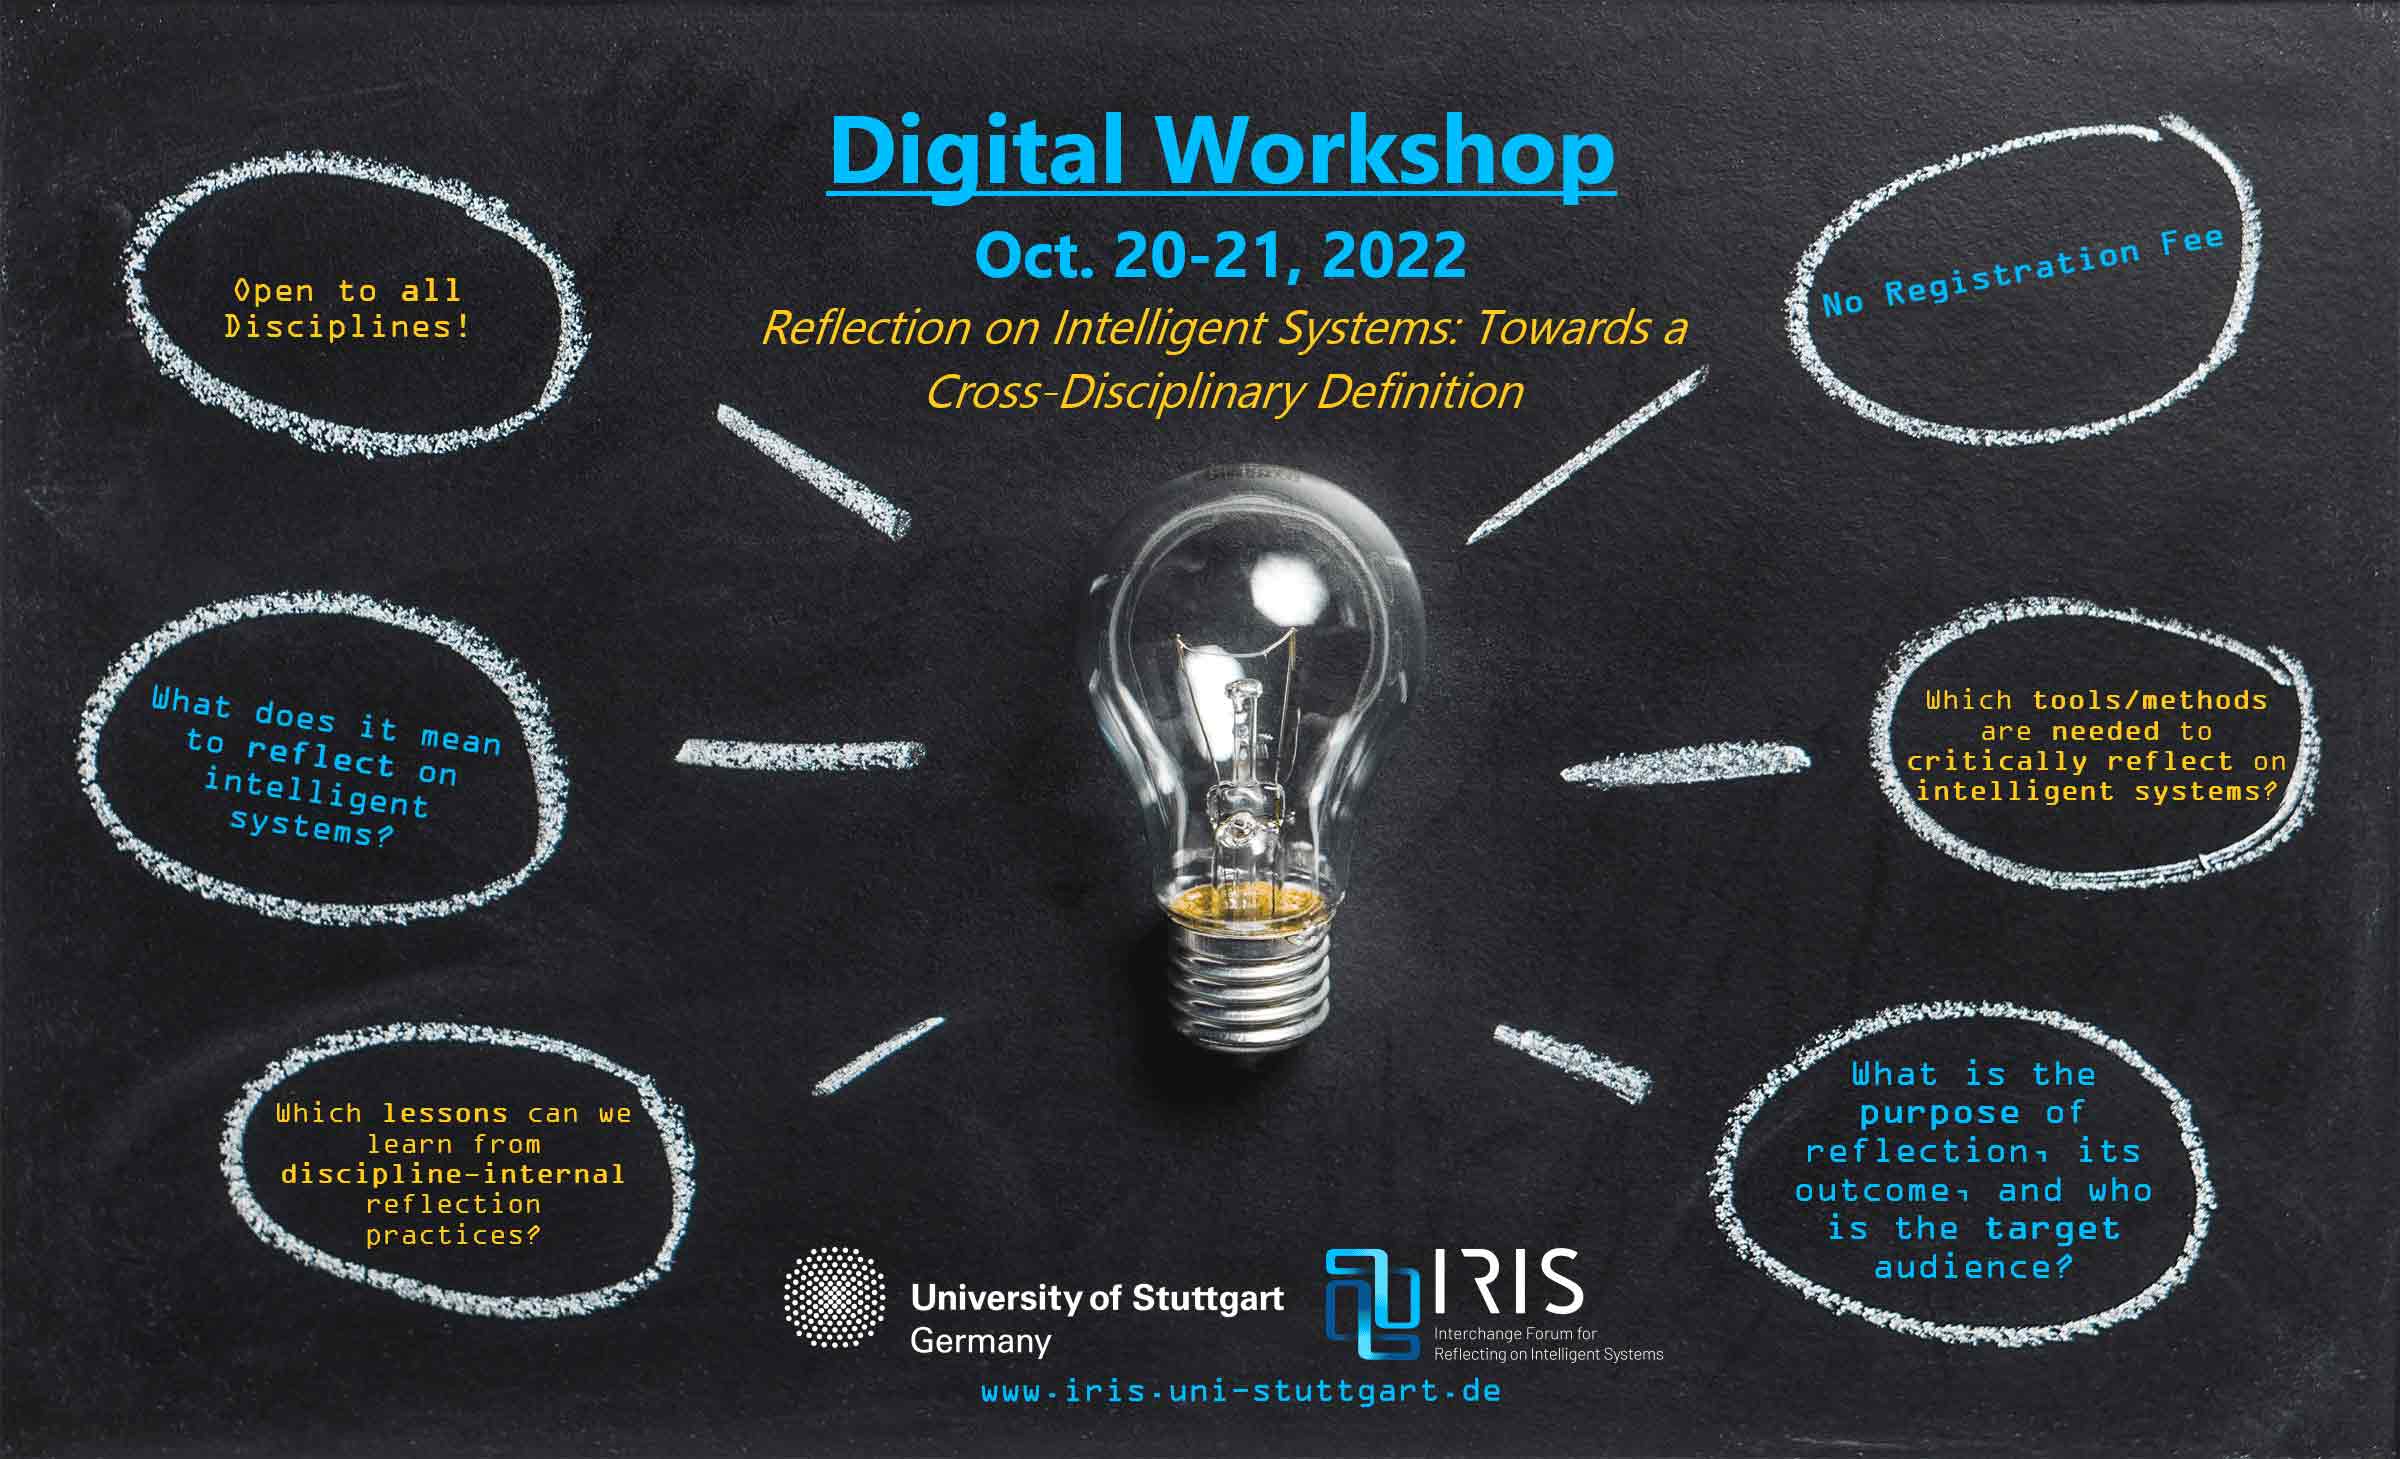 Digital Workshop “Reflection on intelligent systems: towards a cross-disciplinary definition”